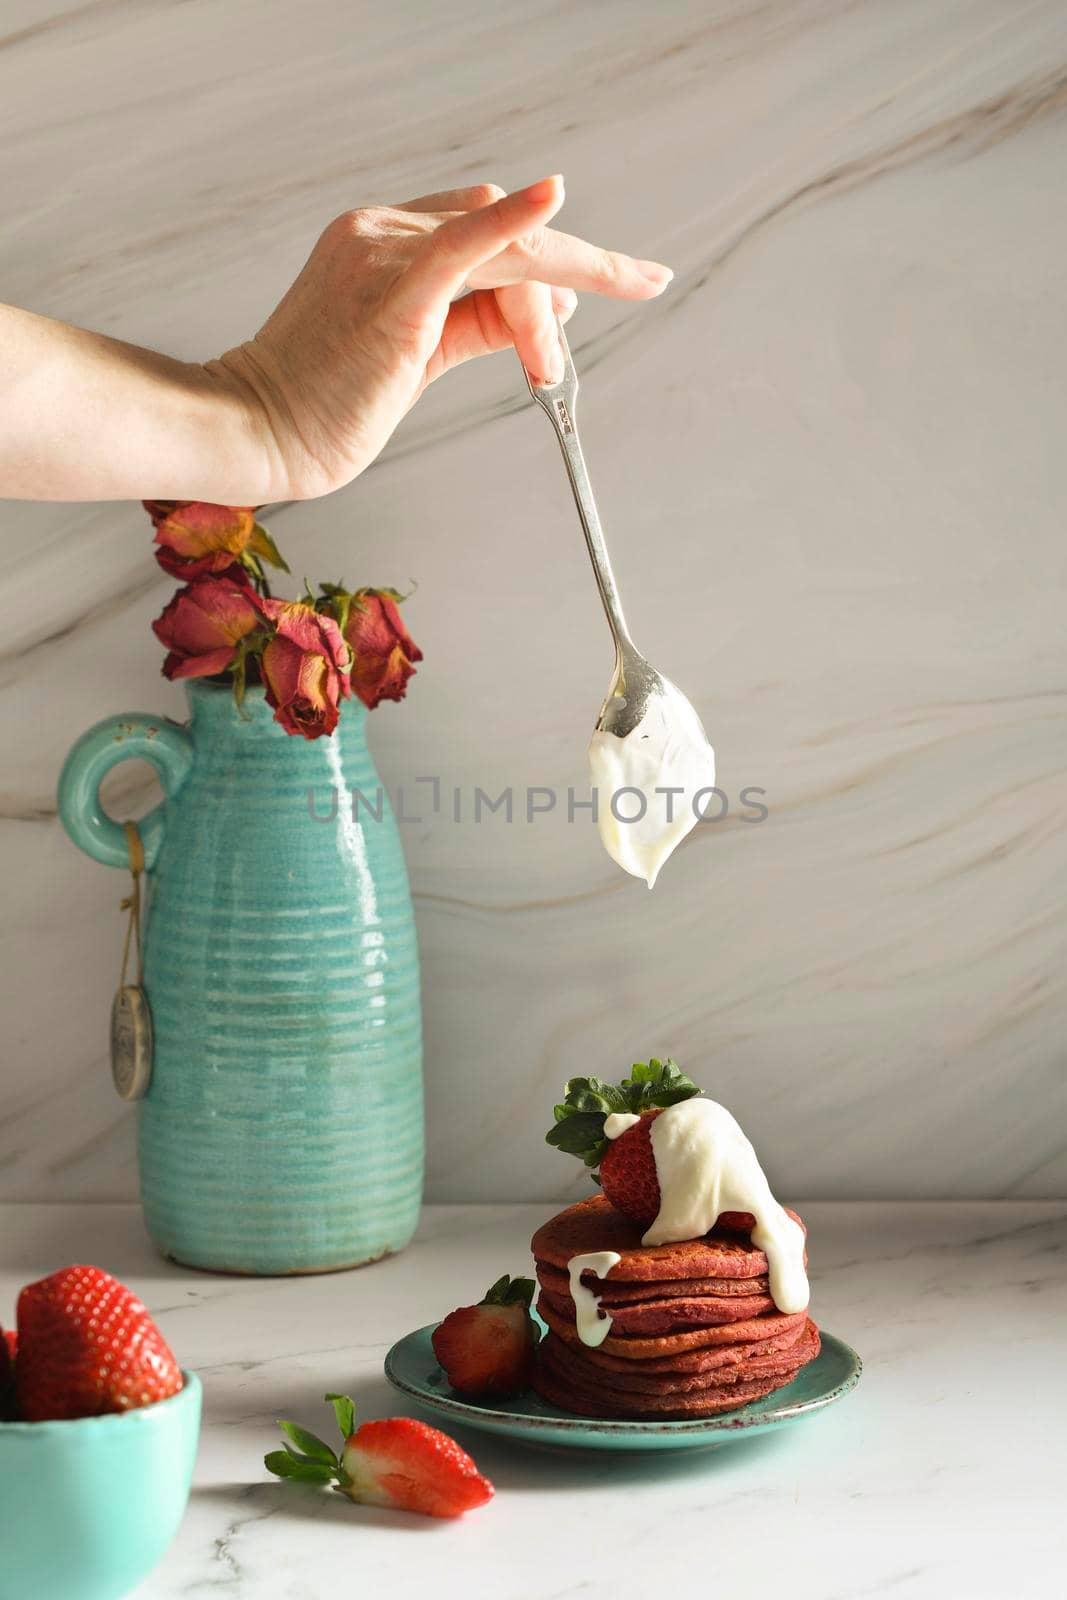 still life with pink strawberry pancakes on a turquoise plate with sour cream and fresh strawberries, cultural exotic food, creative breakfast for Valentine's holiday against a turquoise vase